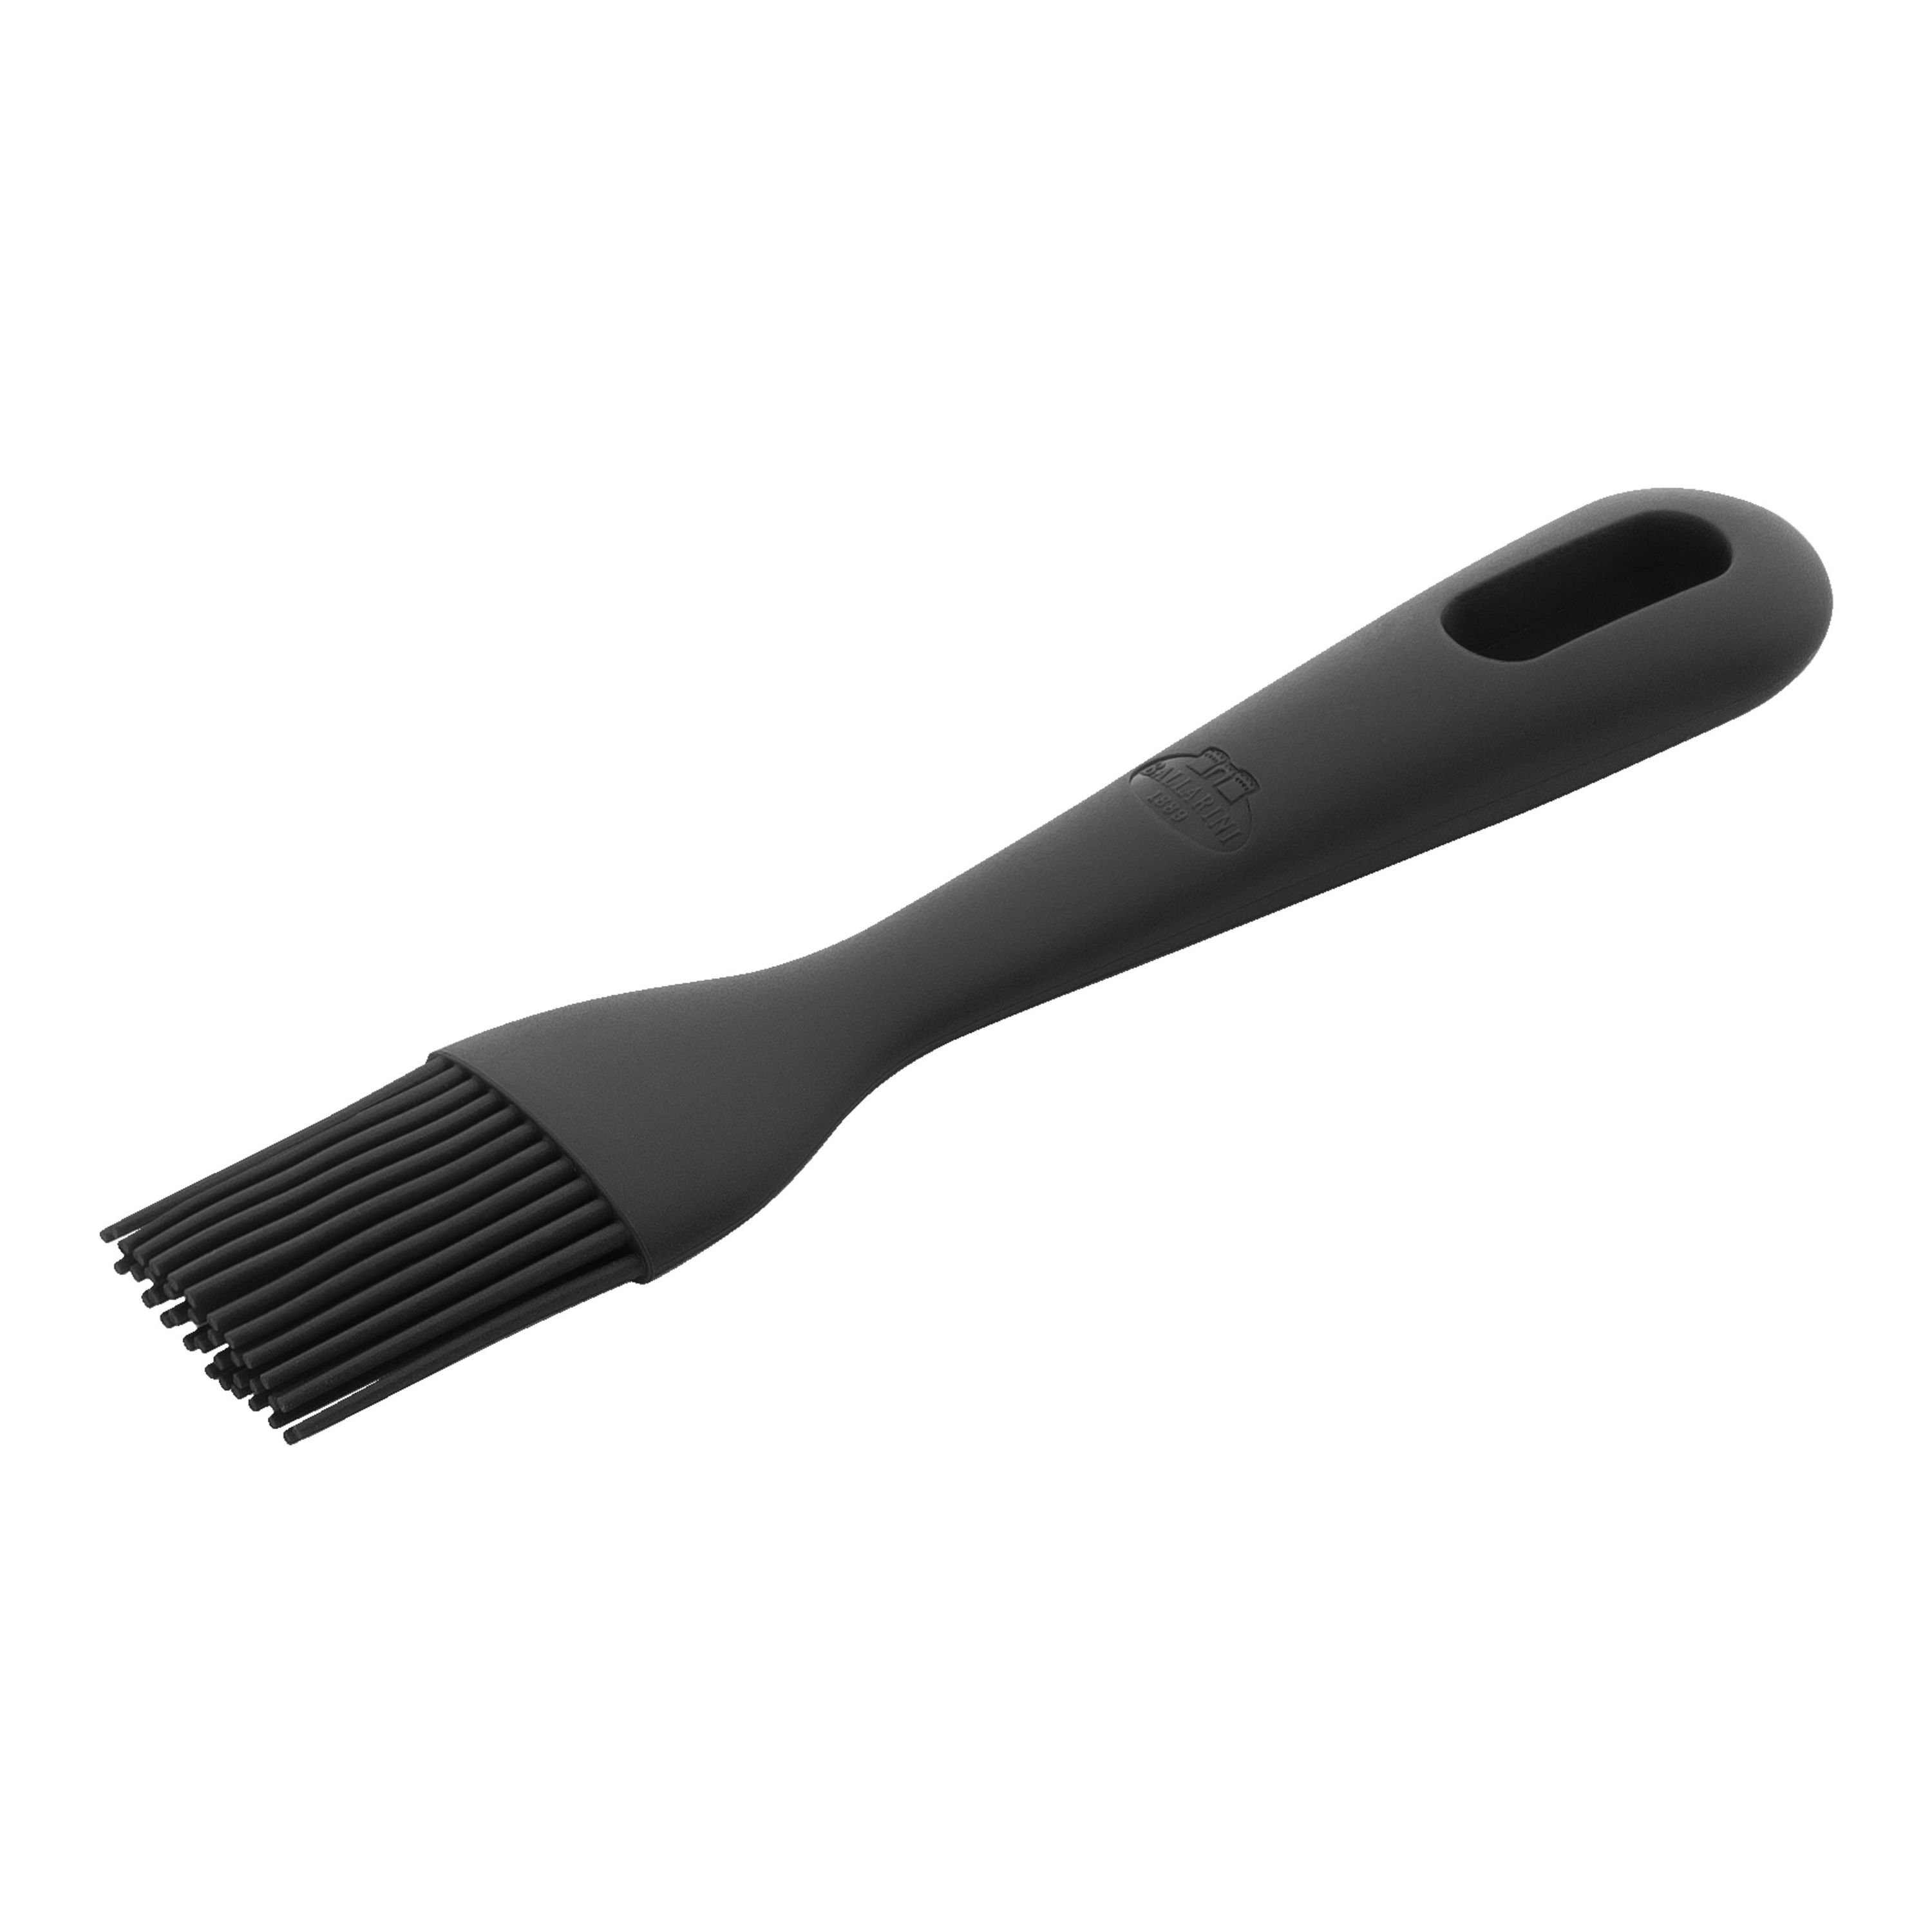 Silicone Oil Brush, Cute Kawaii Bbq Basting Brushes, For Baking